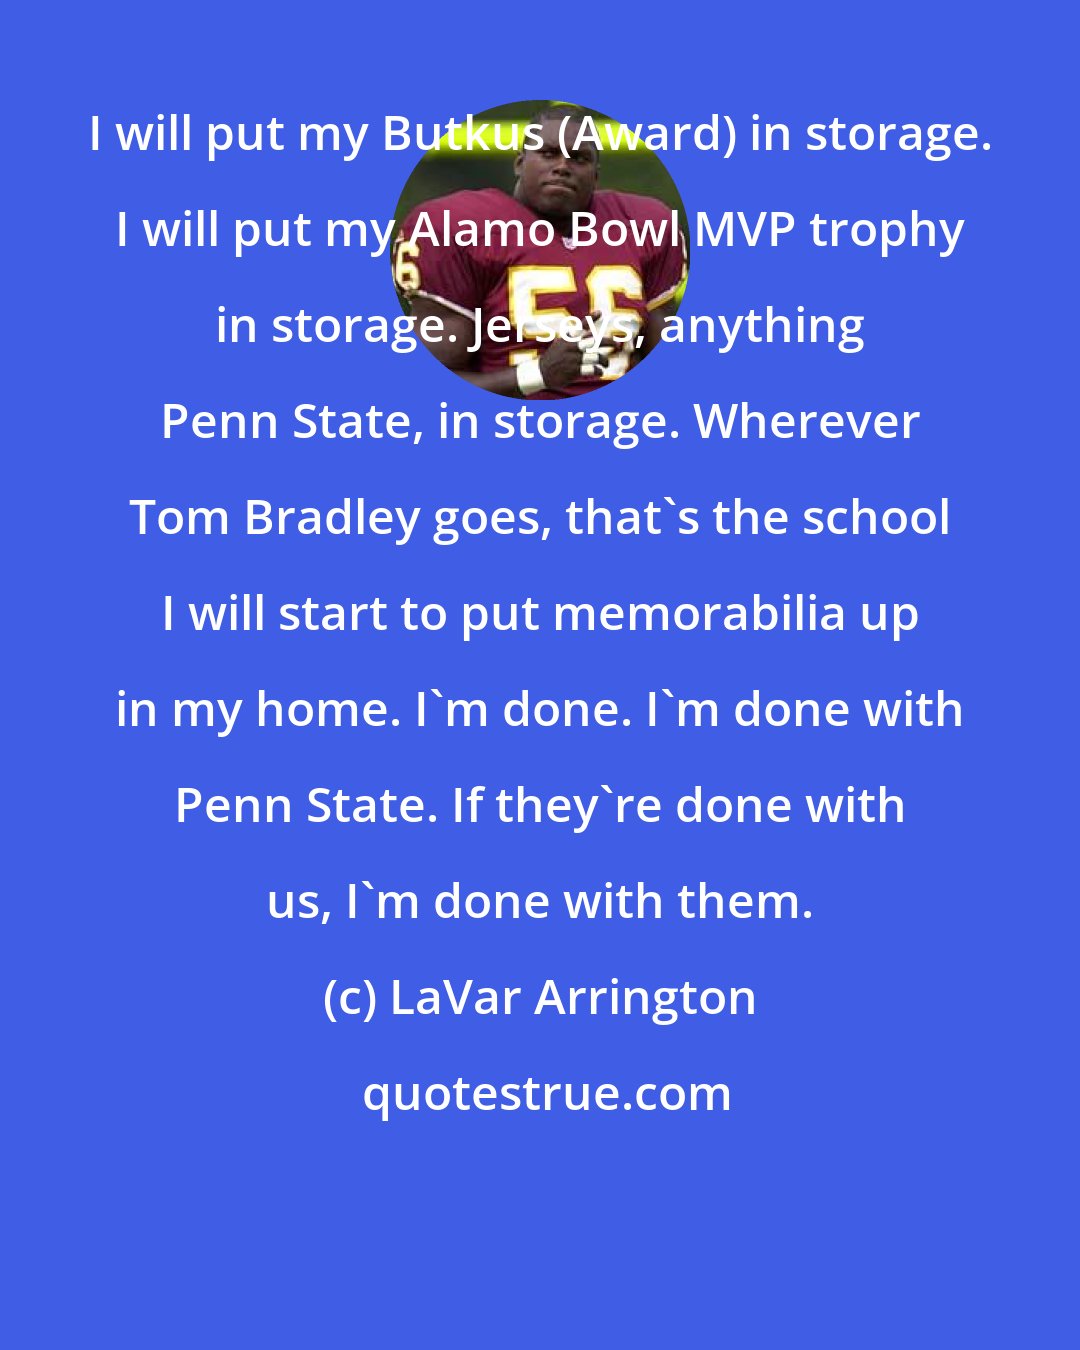 LaVar Arrington: I will put my Butkus (Award) in storage. I will put my Alamo Bowl MVP trophy in storage. Jerseys, anything Penn State, in storage. Wherever Tom Bradley goes, that's the school I will start to put memorabilia up in my home. I'm done. I'm done with Penn State. If they're done with us, I'm done with them.